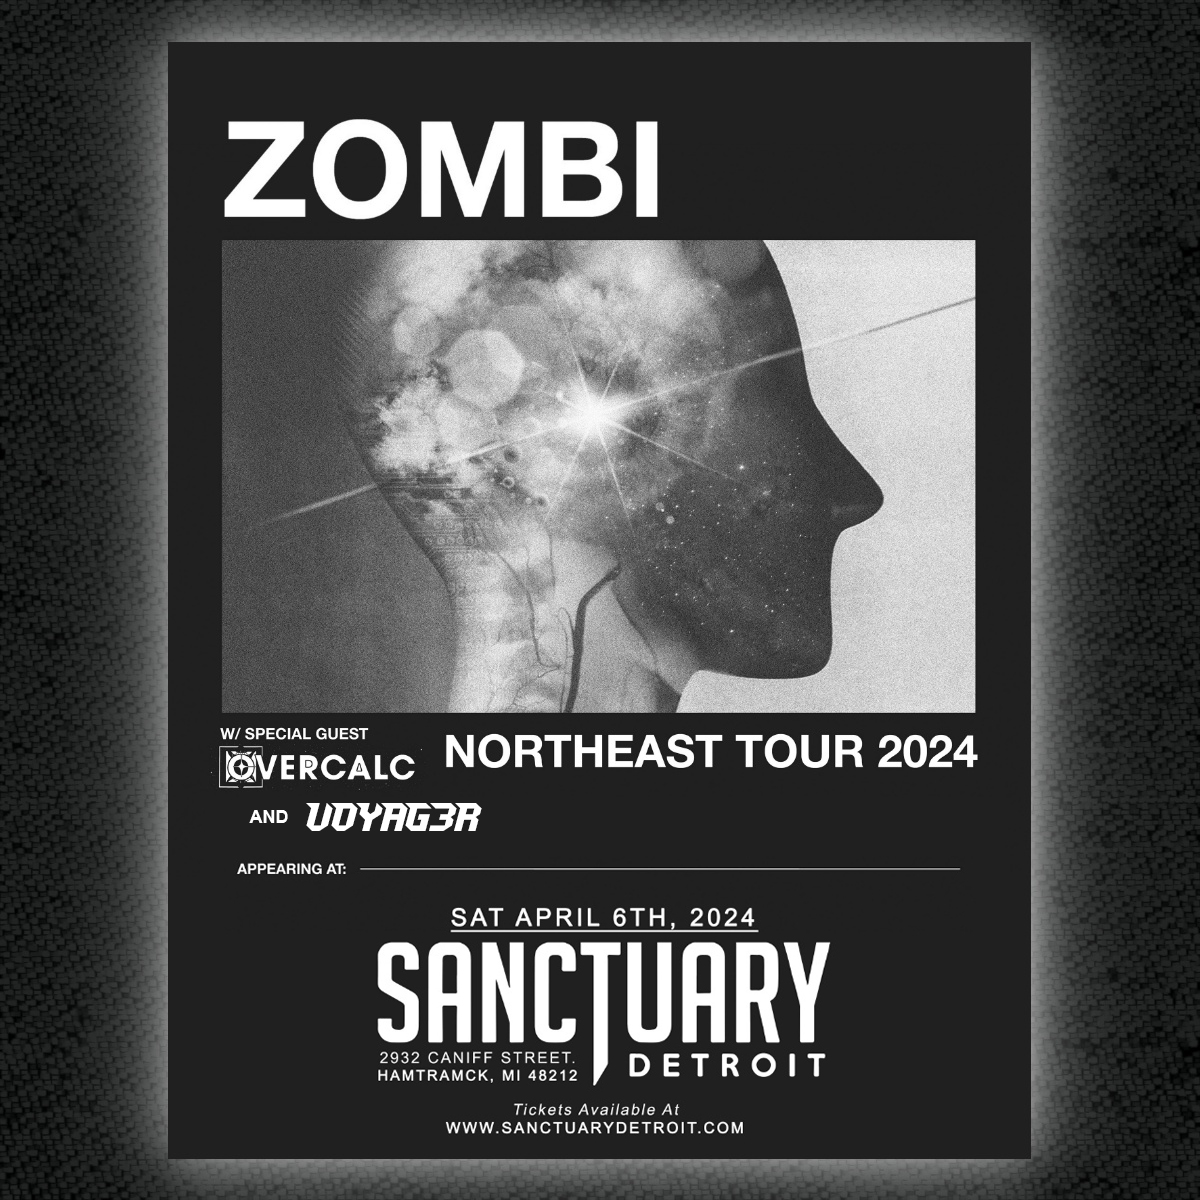 BIG NEWS!!! Voyag3r are set to be support for @ZombiBand on the Detroit stop of their upcoming tour (in support of their new album, Direct Inject)! Saturday, April 6 at the @sanctuarydet. Get your tickets now and order your copy of Direct Inject from @RelapseRecords.